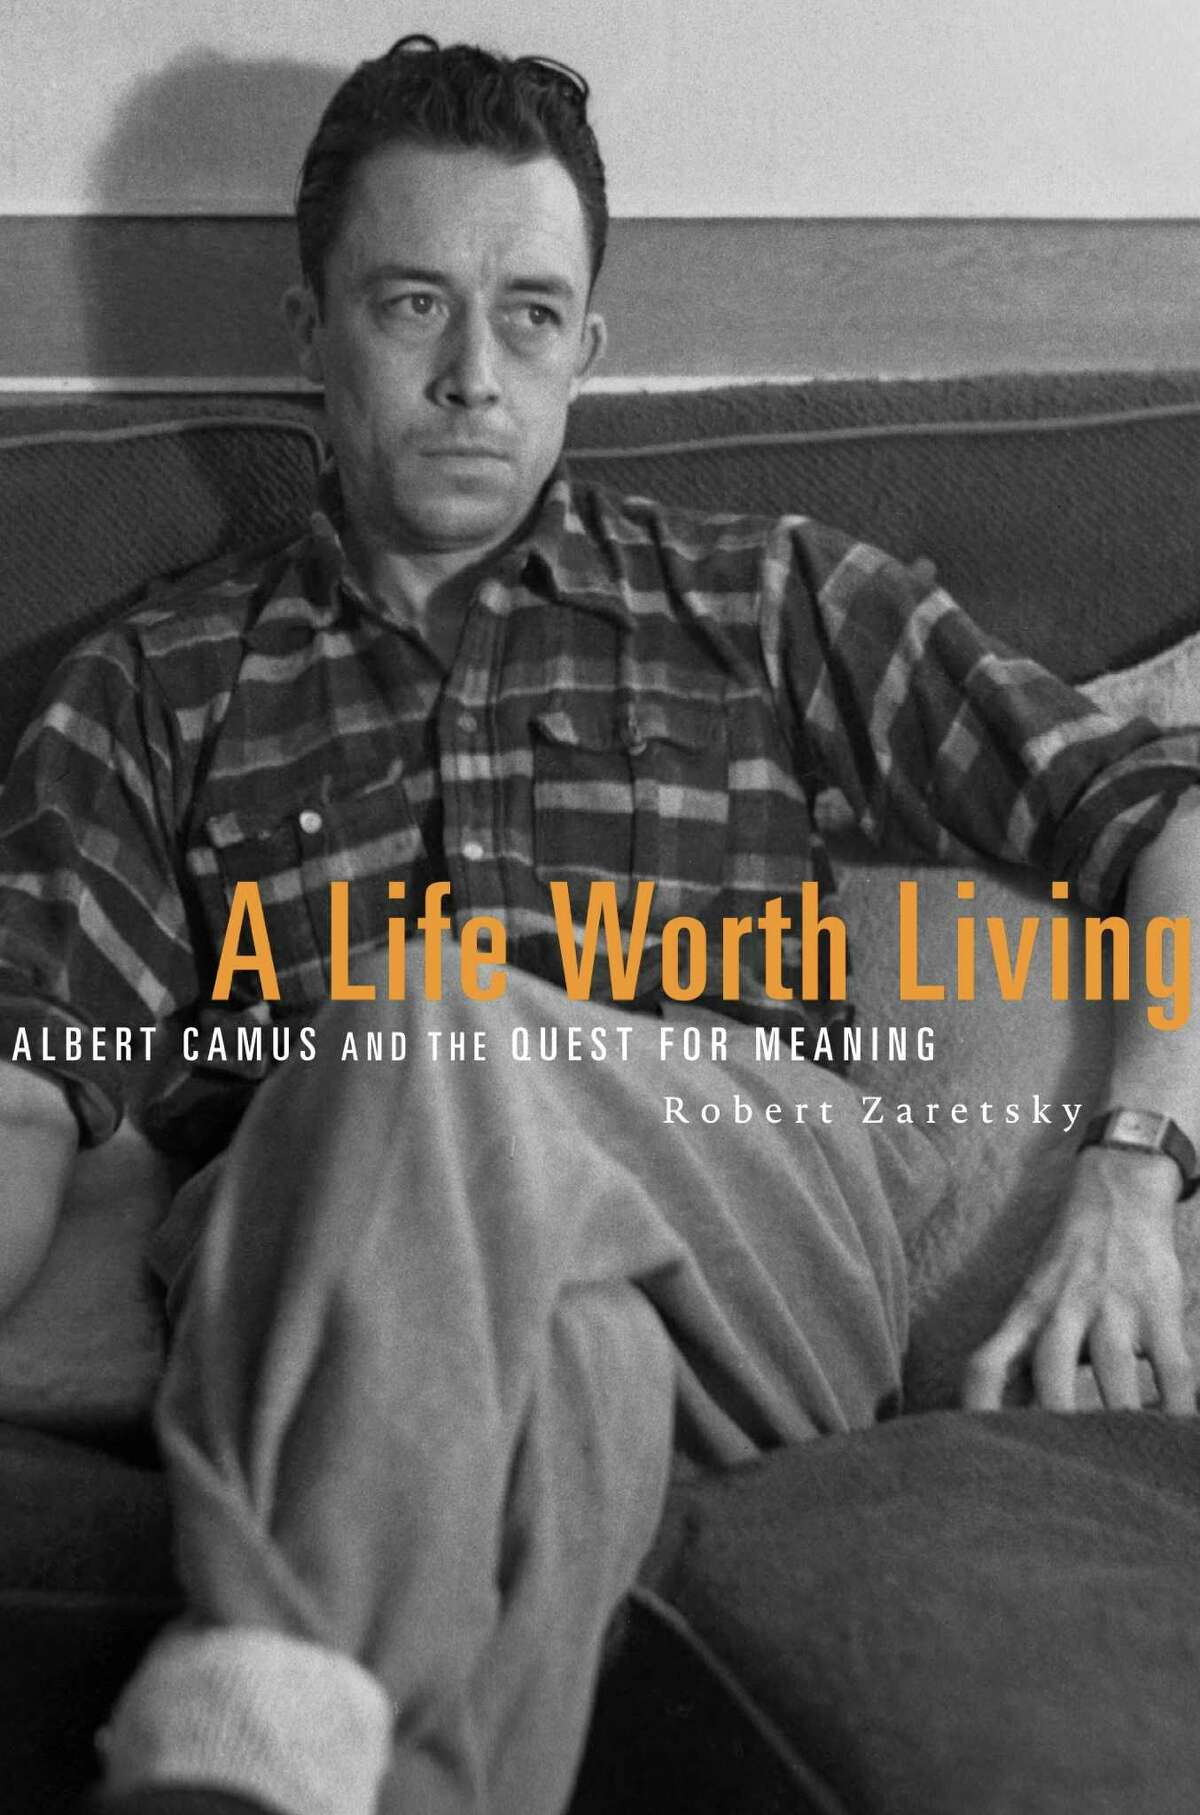 Book cover for new title by Robert Zaretsky, "A Life Worth Living: Albert Camus and the Quest for Meaning"